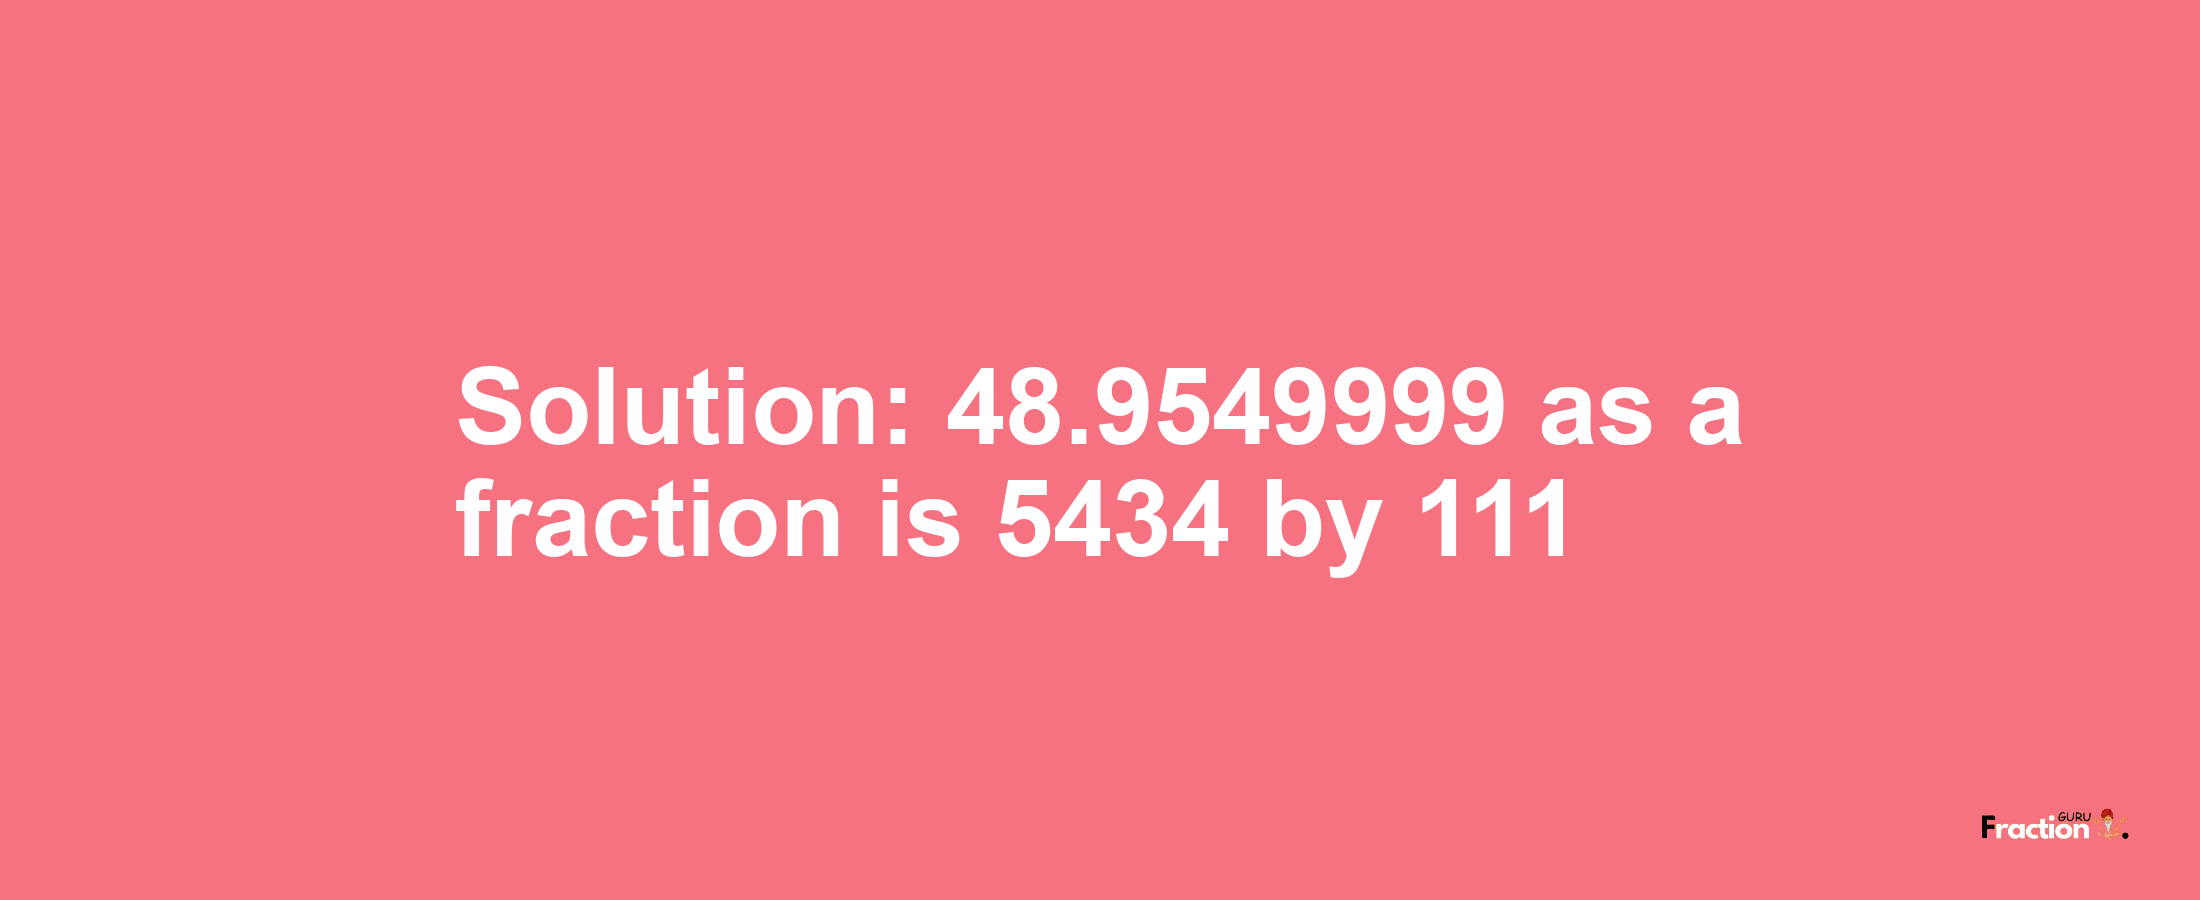 Solution:48.9549999 as a fraction is 5434/111